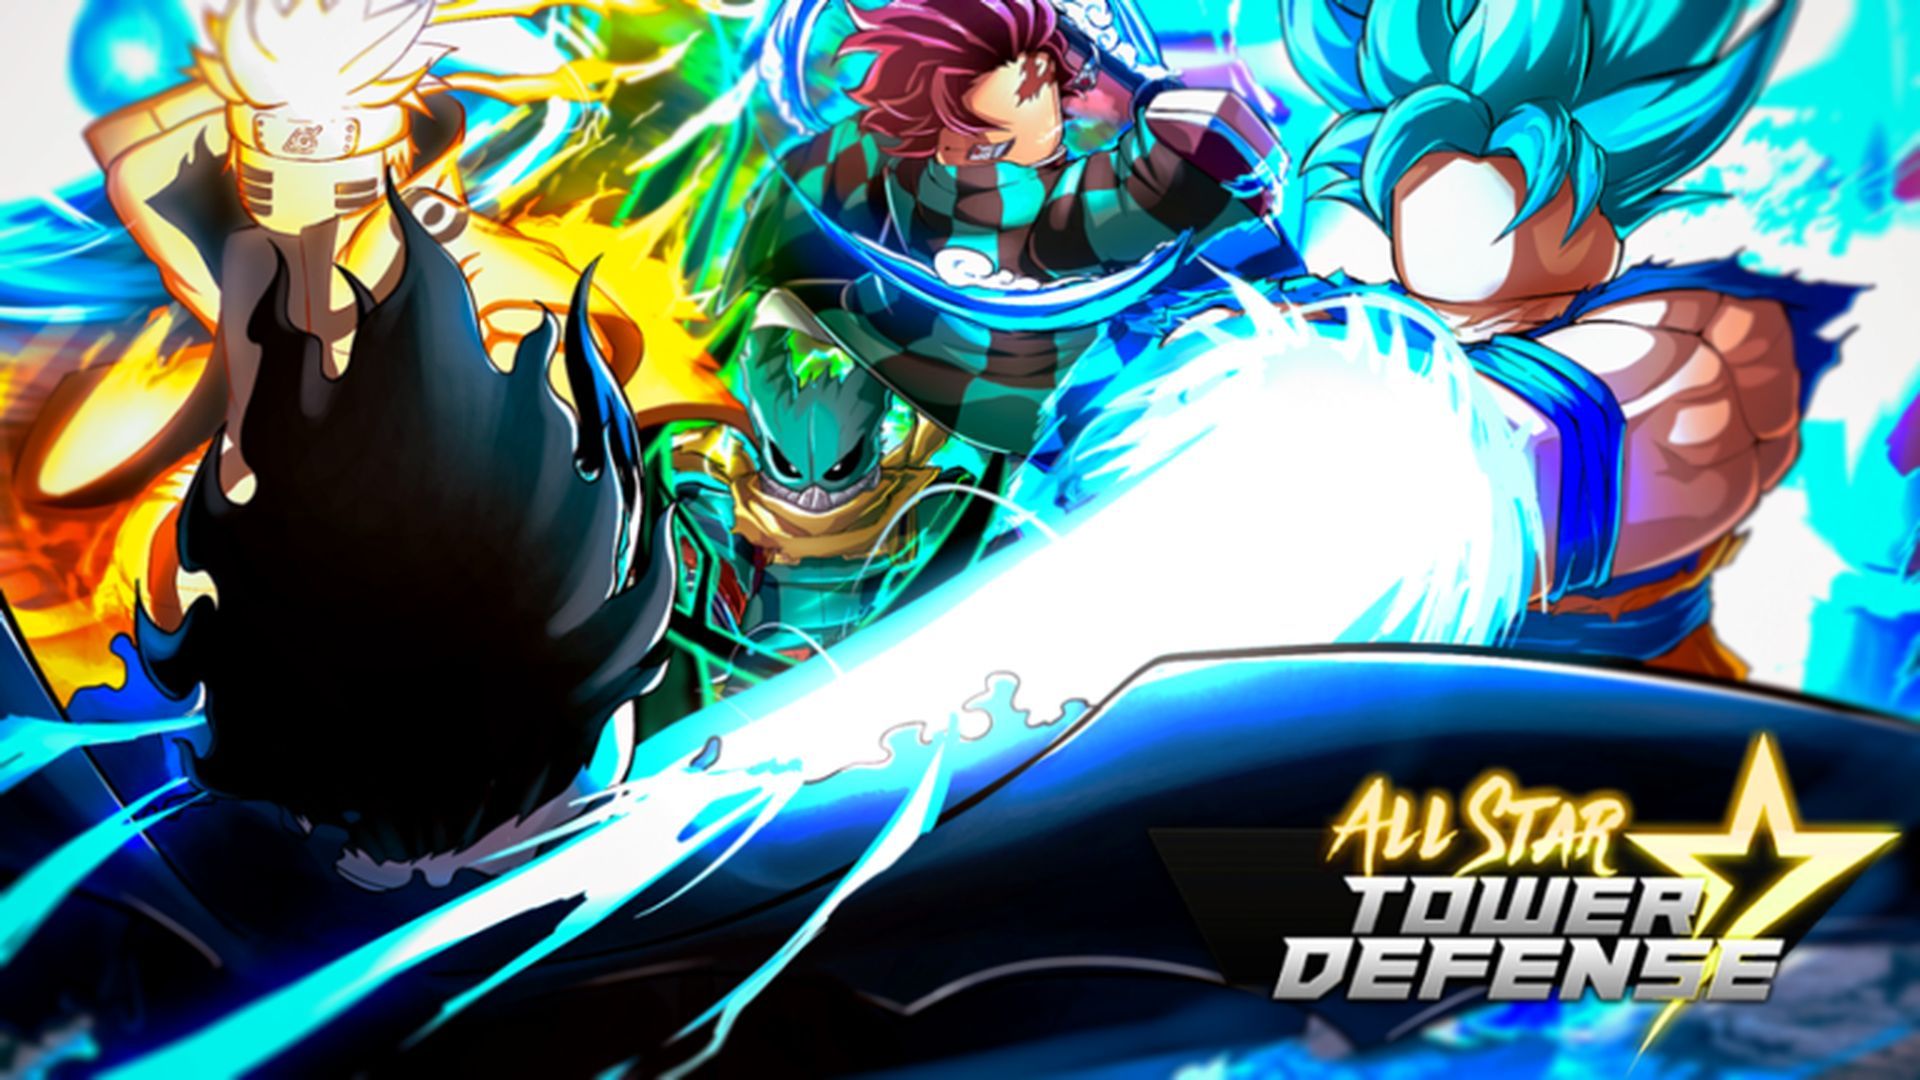 Boost your gameplay with latest All Star Tower Defense codes (Image credit)